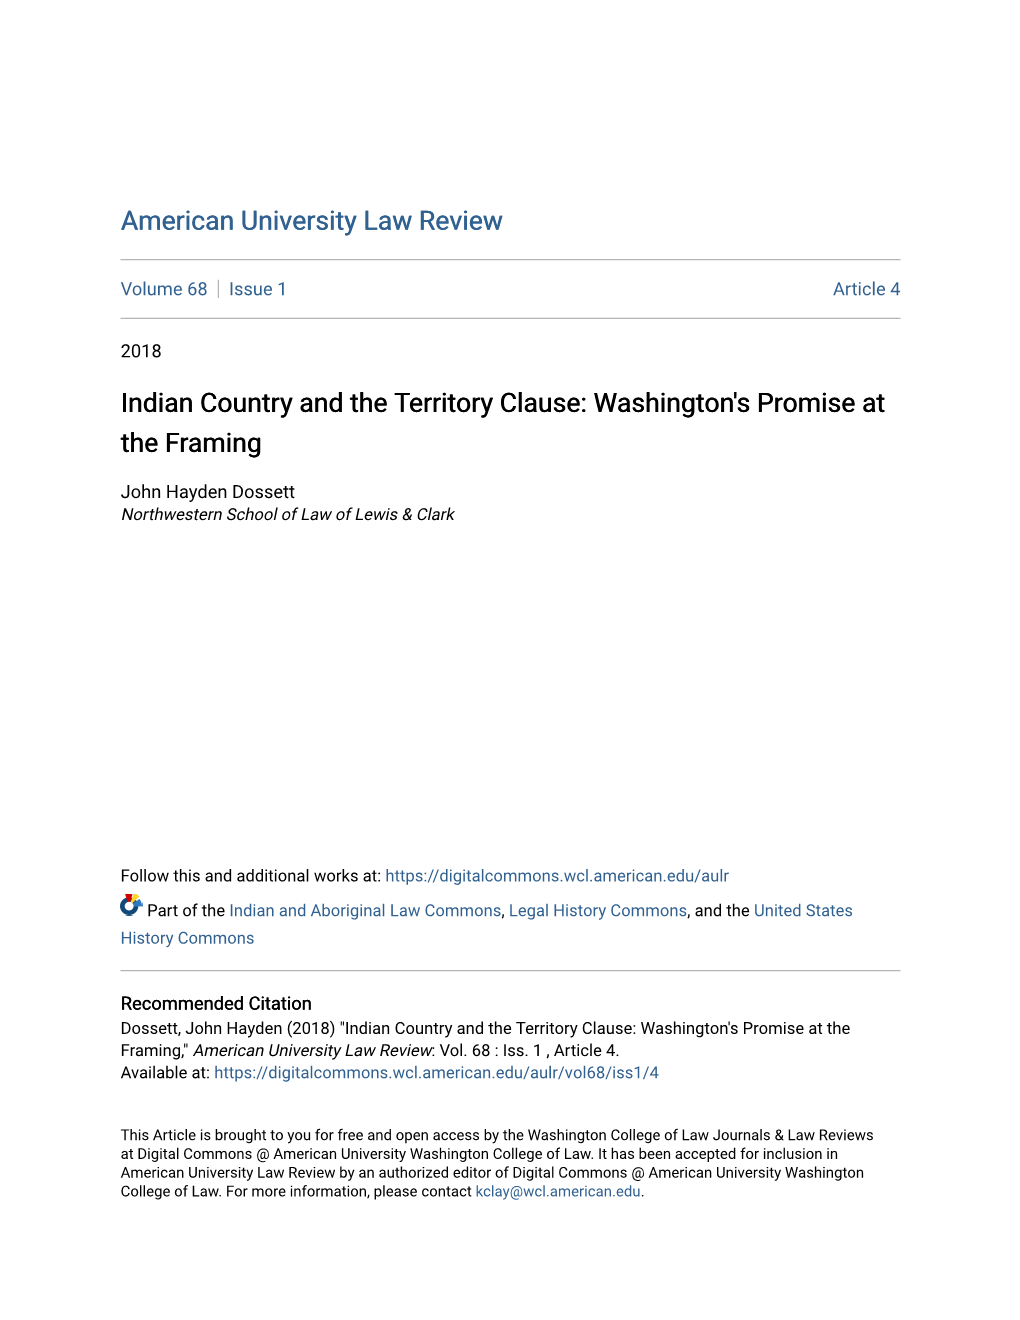 Indian Country and the Territory Clause: Washington's Promise at the Framing